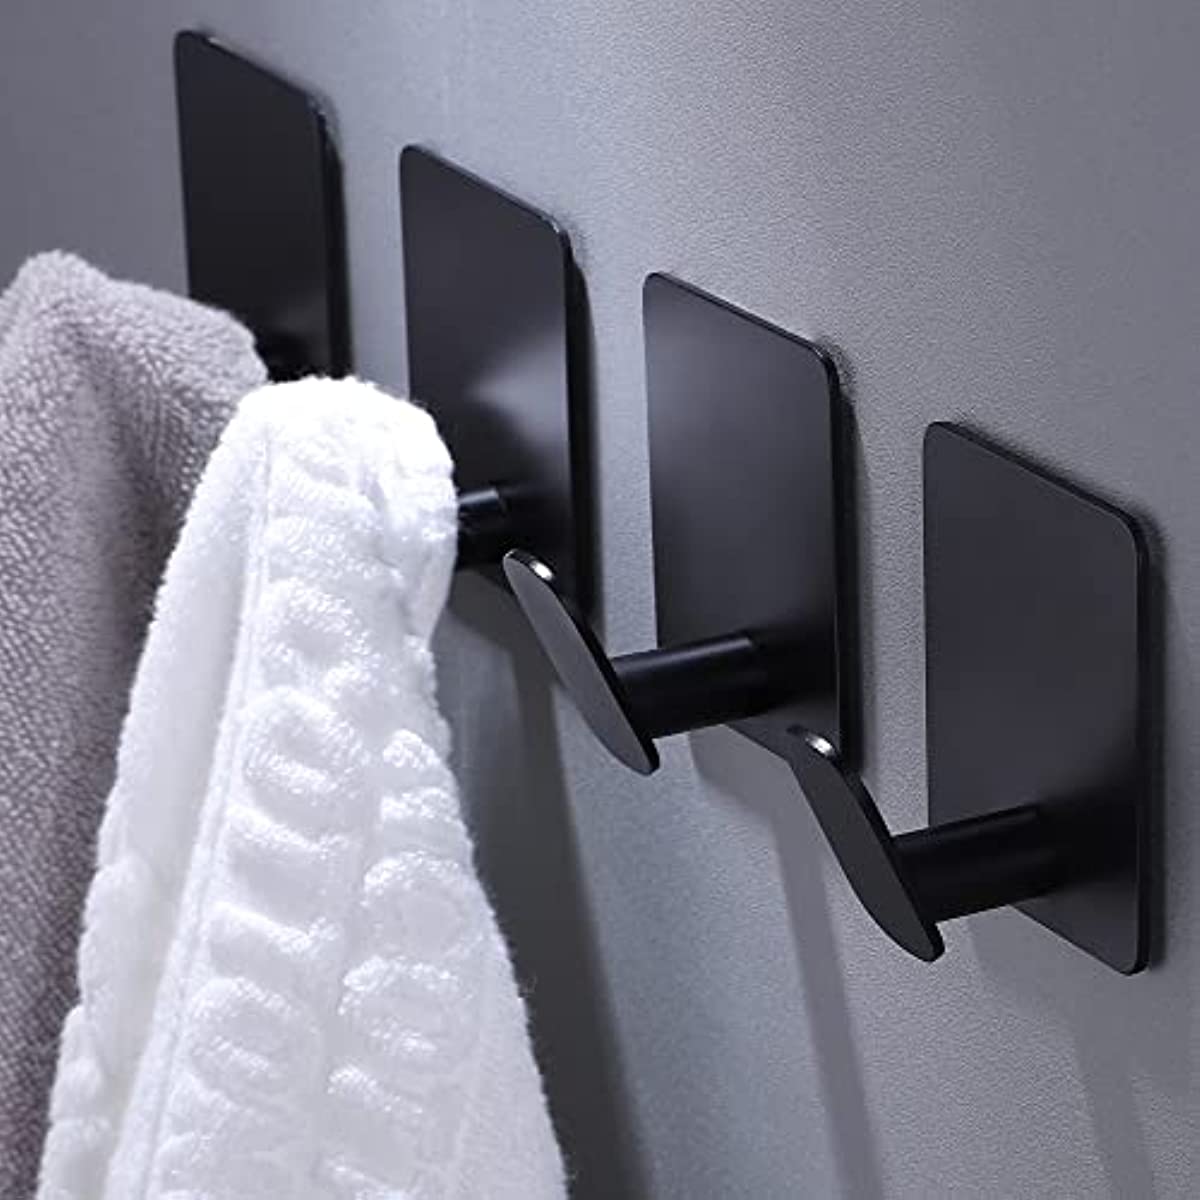 4pcs Adhesive Hook, (Stainless Steel)Towel/Coat Hooks, Wall Hooks For Hanging Clothes Hats And Robe, Stick On Bathroom Or Kitchen